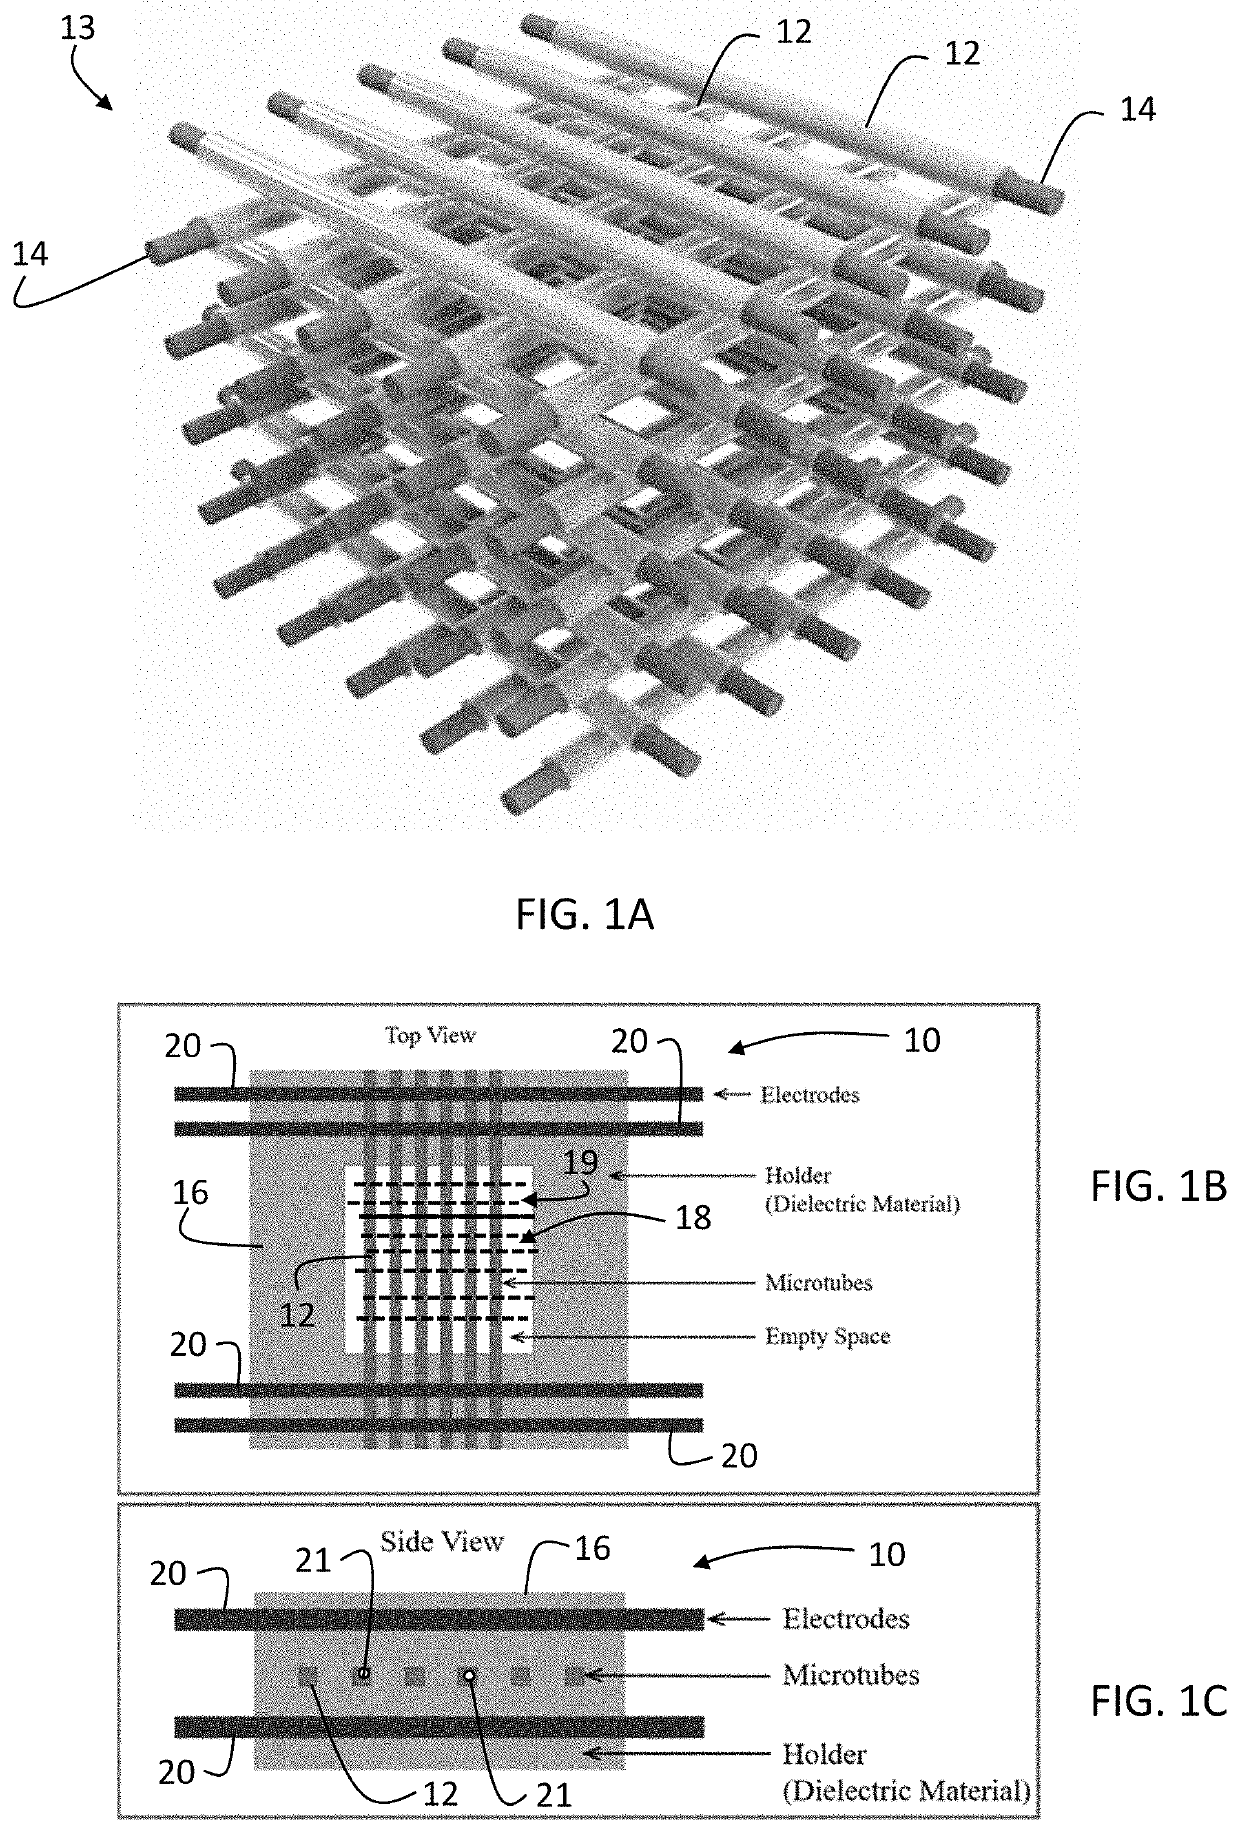 Plasma photonic crystals with integrated plasmonic arrays in a microtubular frame